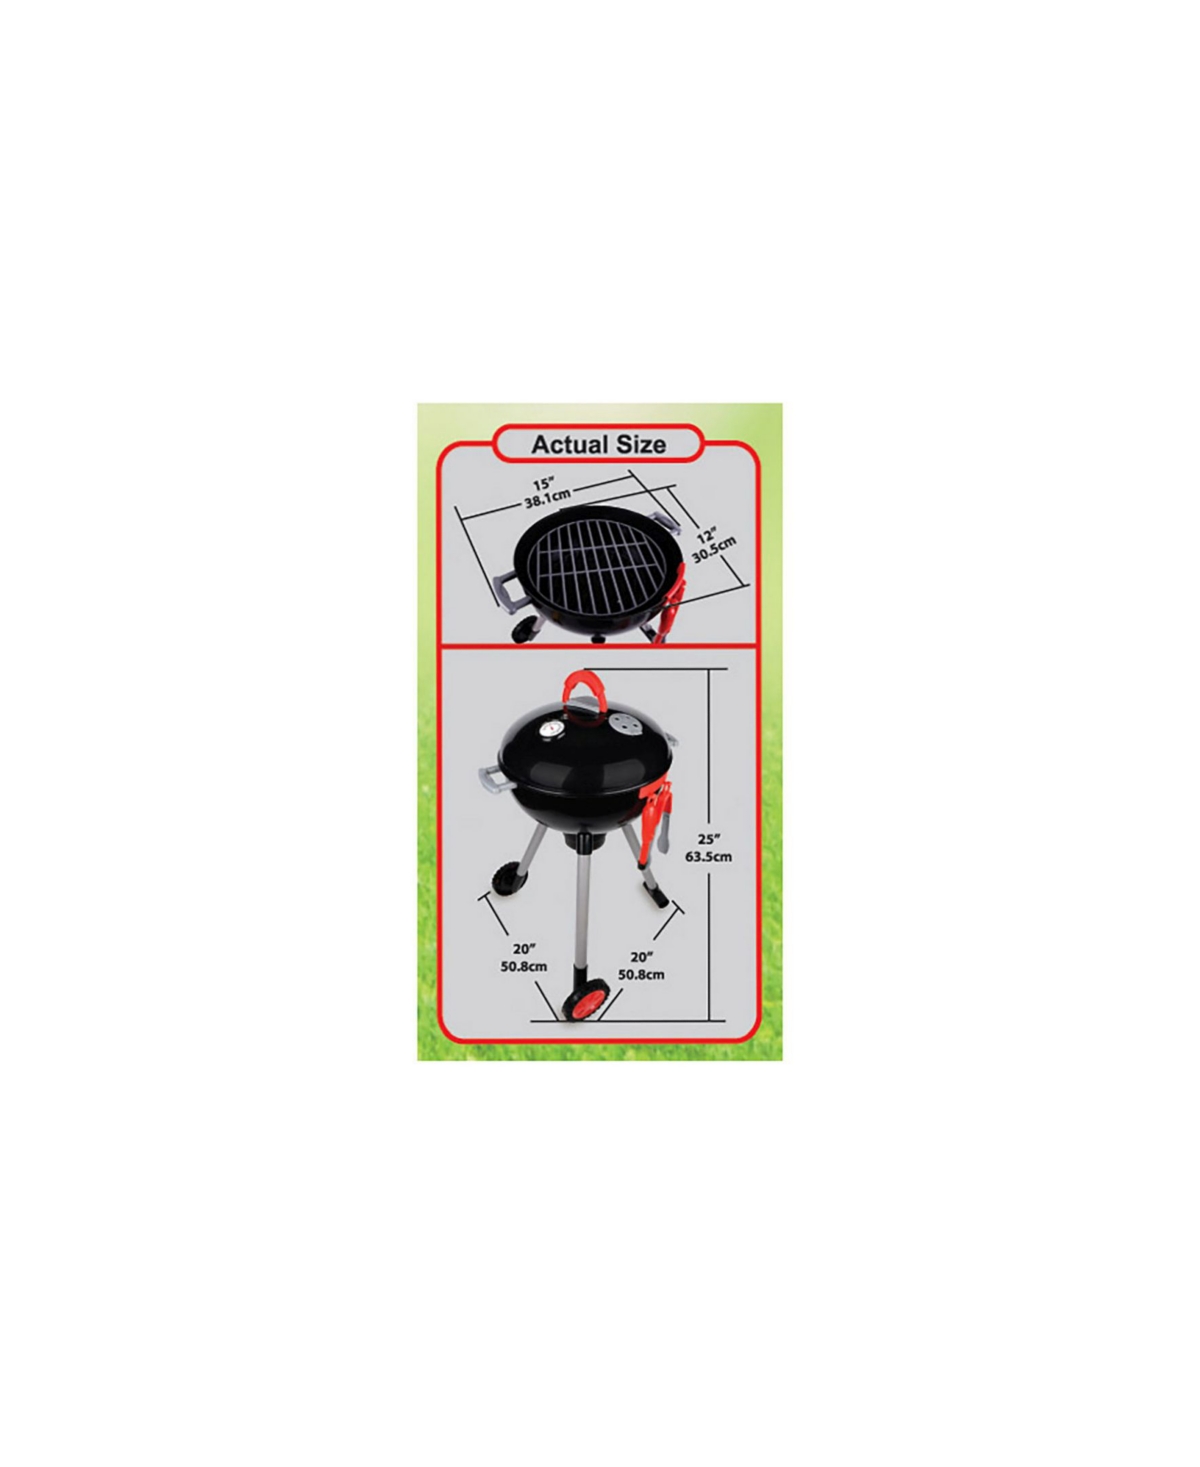 Shop Redbox Light And Sound Barbeque Grill Set In Multi